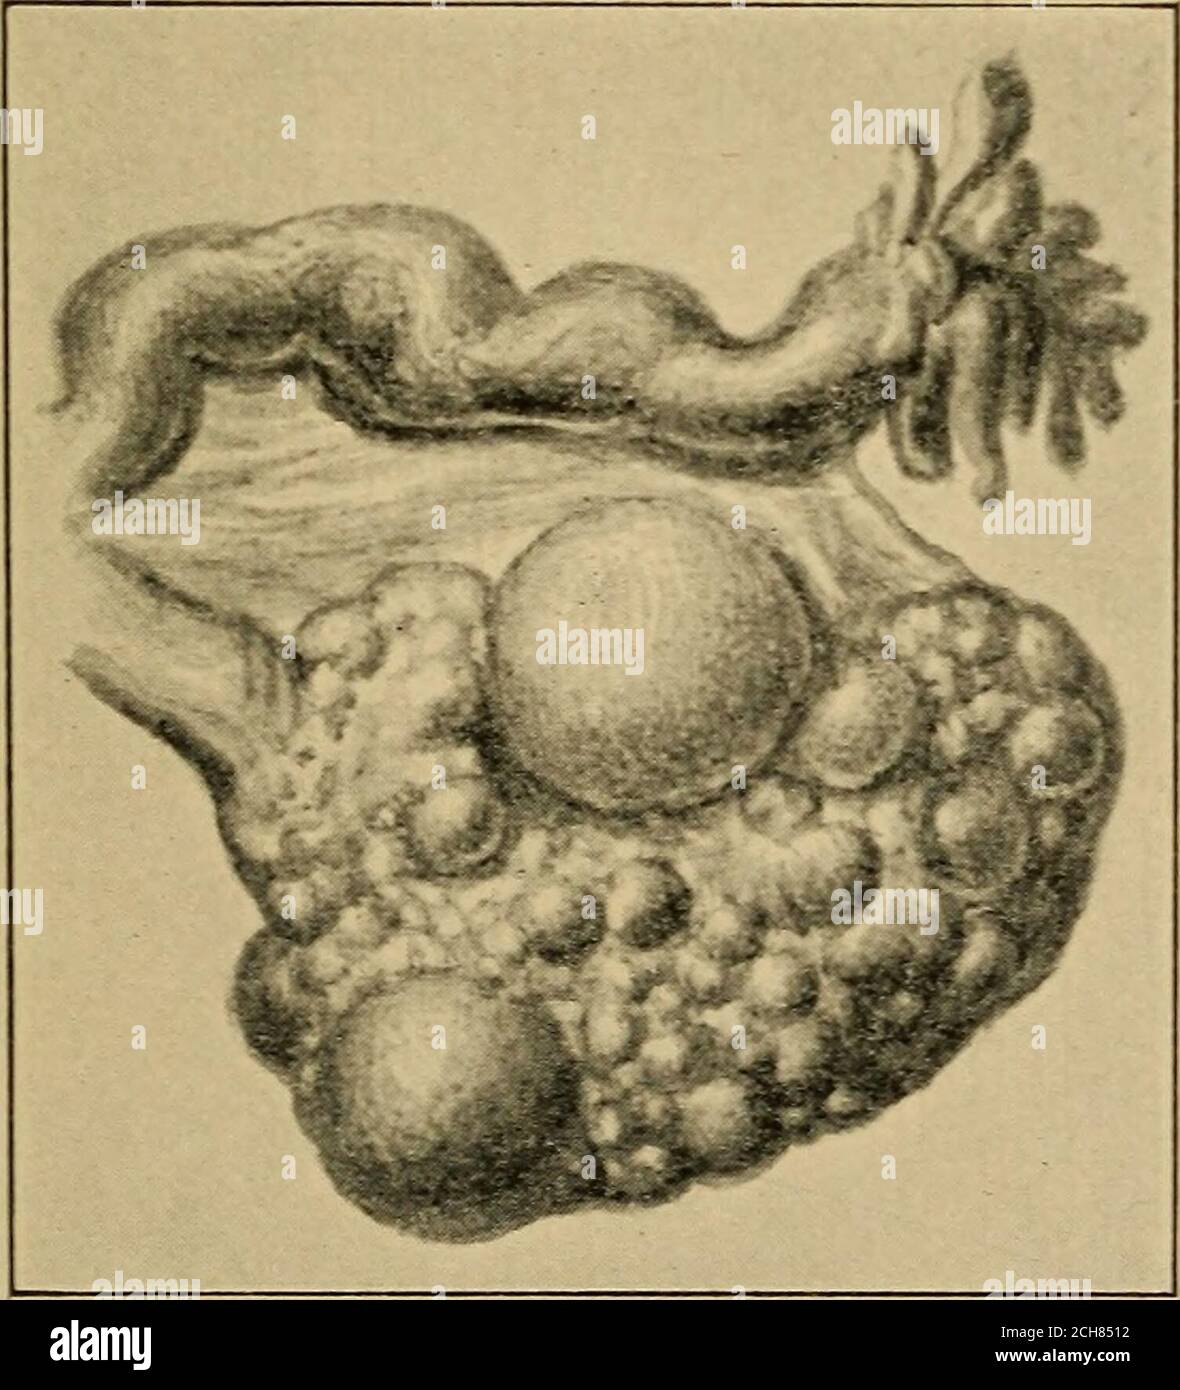 . Atlas and epitome of gynecology . Fig. 34.—Senile cirrhotic atrophy of the ovary.. Fig. 35.—Oligocystic degeneration of the ovary. inflammations of the tubes. (Fig. 36.) This oophoro-salpingitis is combined with perimetrosalpingitis, peri-metro-oophoritis, and pyosalpinx, forming, together withencapsulated ovarian and peritoneal pus sacs, a large ag- 128 CHRONIC OOPHORITIS. PLATE 44. Pelvic Peritonitis, Perioophoritis, Perisalpingitis and Right=sided Pyosalpinx. View of the pouch of Douglas. Pseudoliga-inents fix the uterus aud its aduexa to the sigmoid flexure. The lefttube is beut at an an Stock Photo